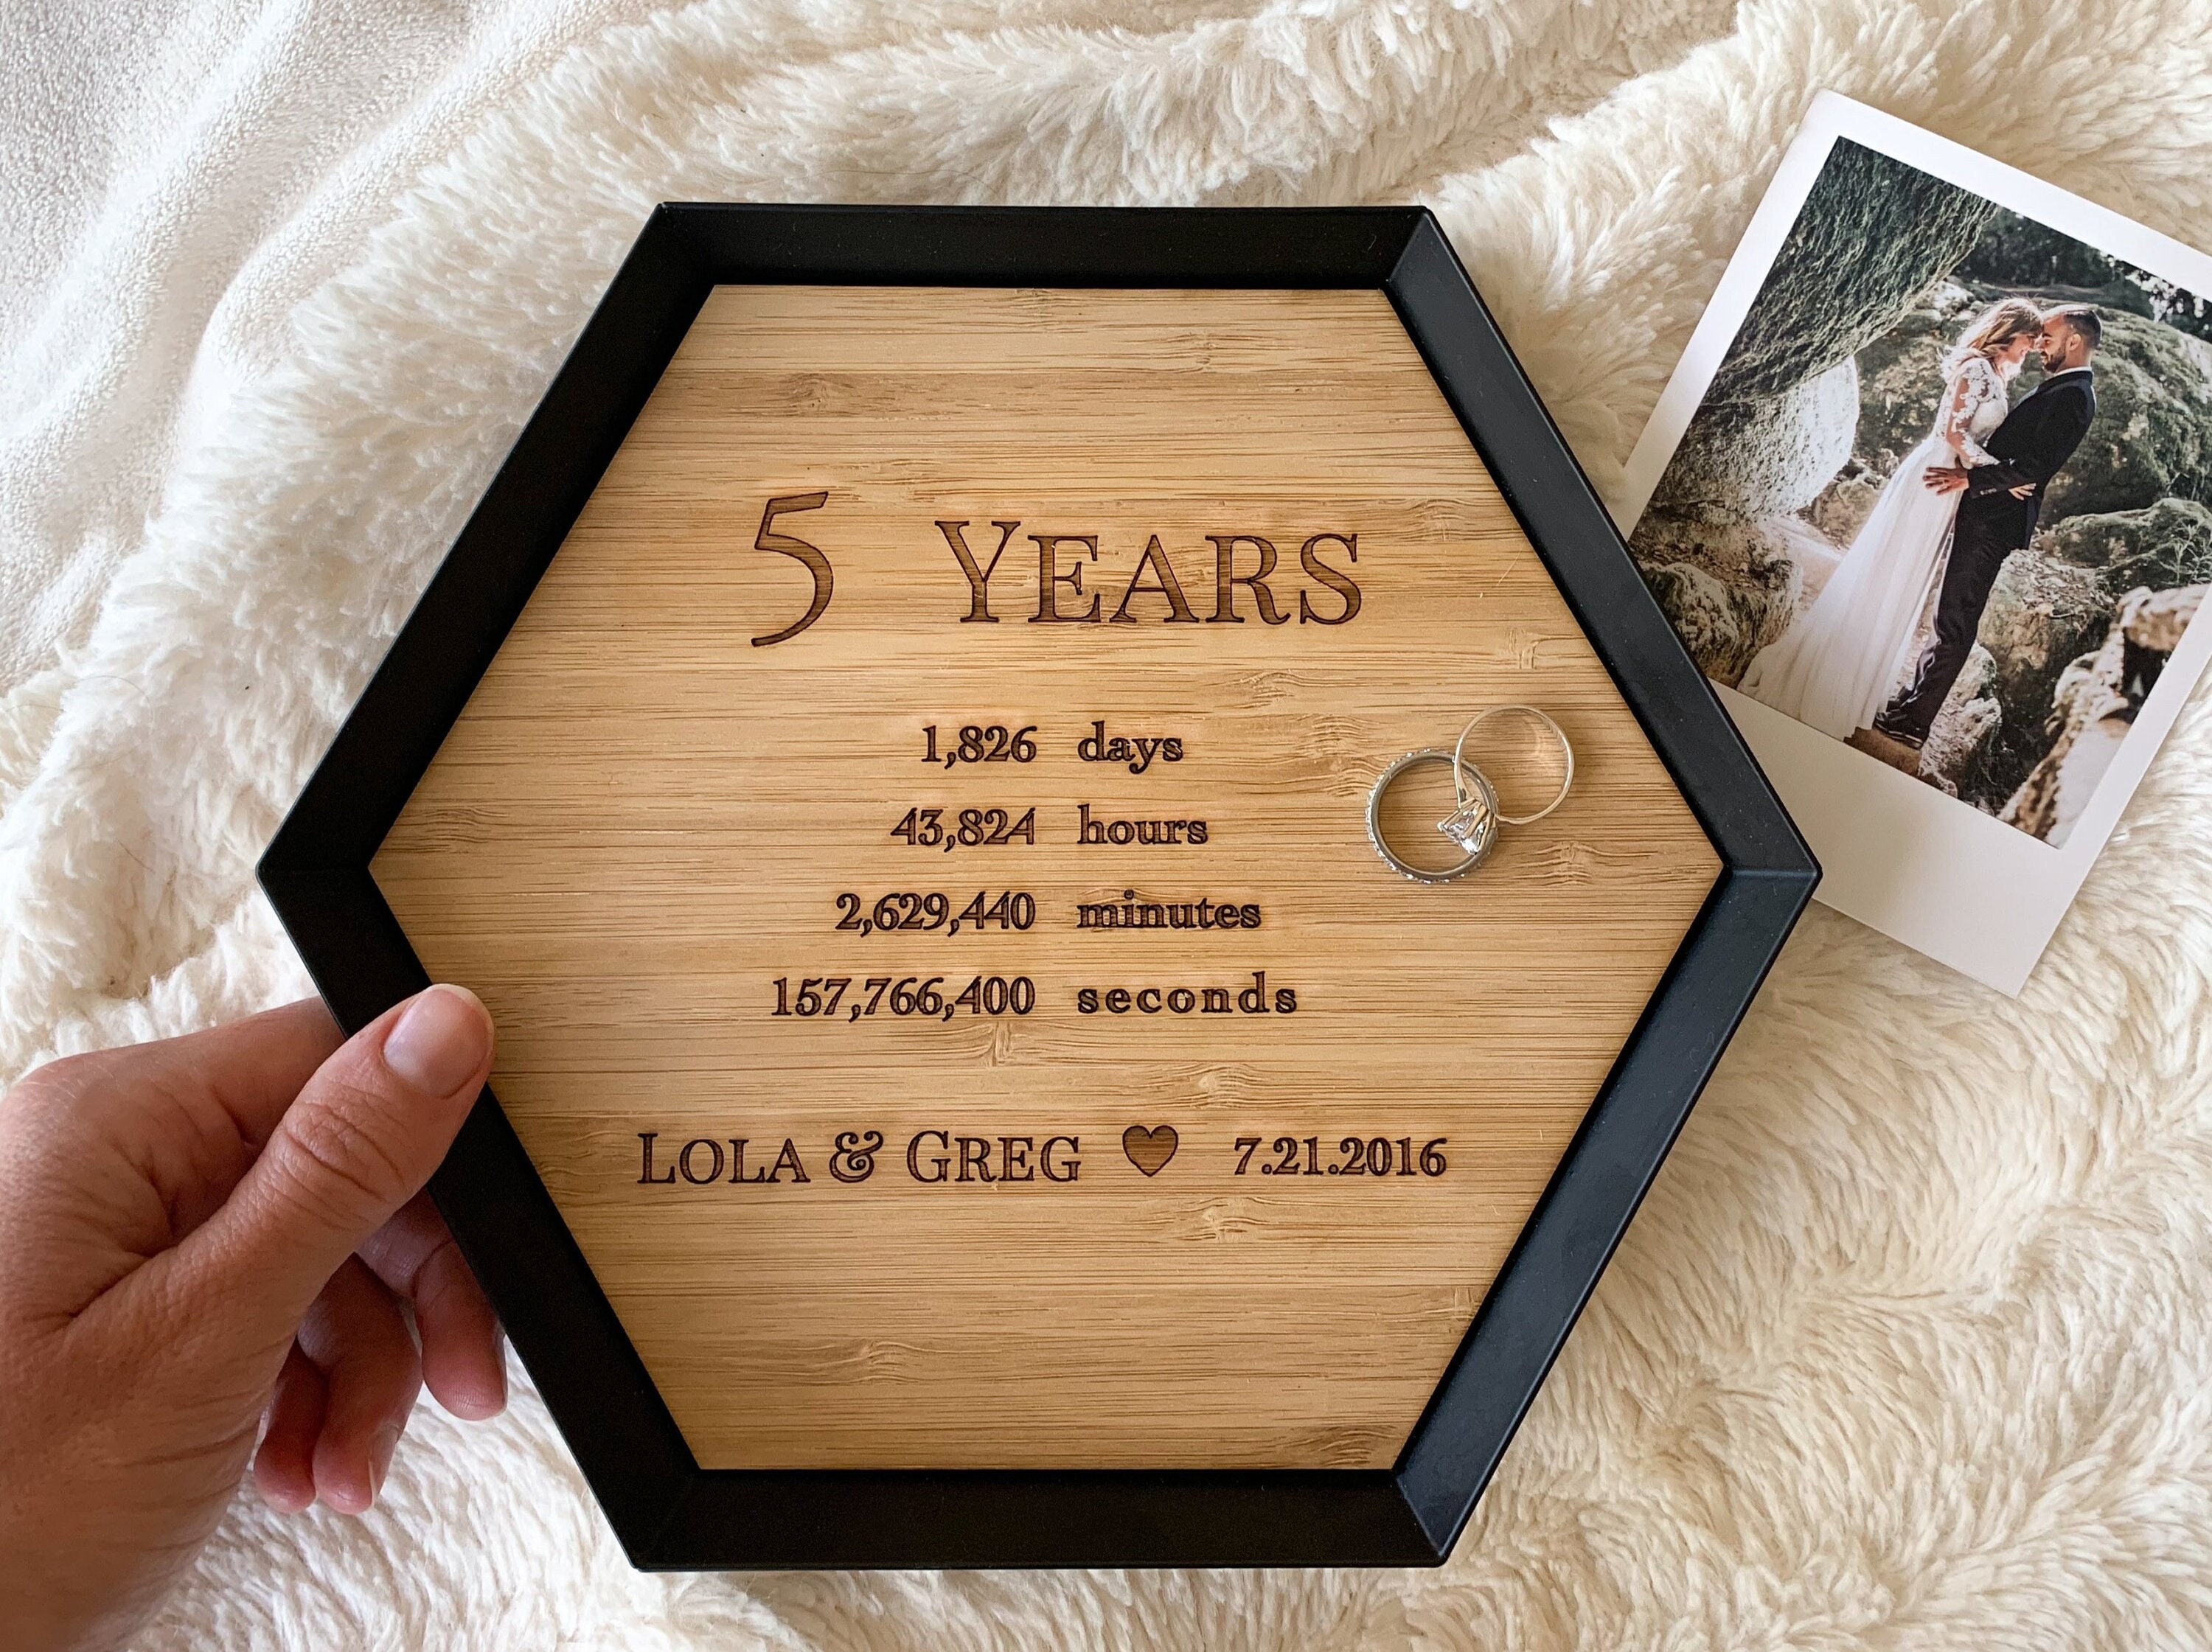 STOFINITY 5 Year Anniversary Wood Gift for Him Her - 5th Anniversary Wooden  Gifts for Wife Husband, 5 Year Marriage Gifts Anniversary for Couple